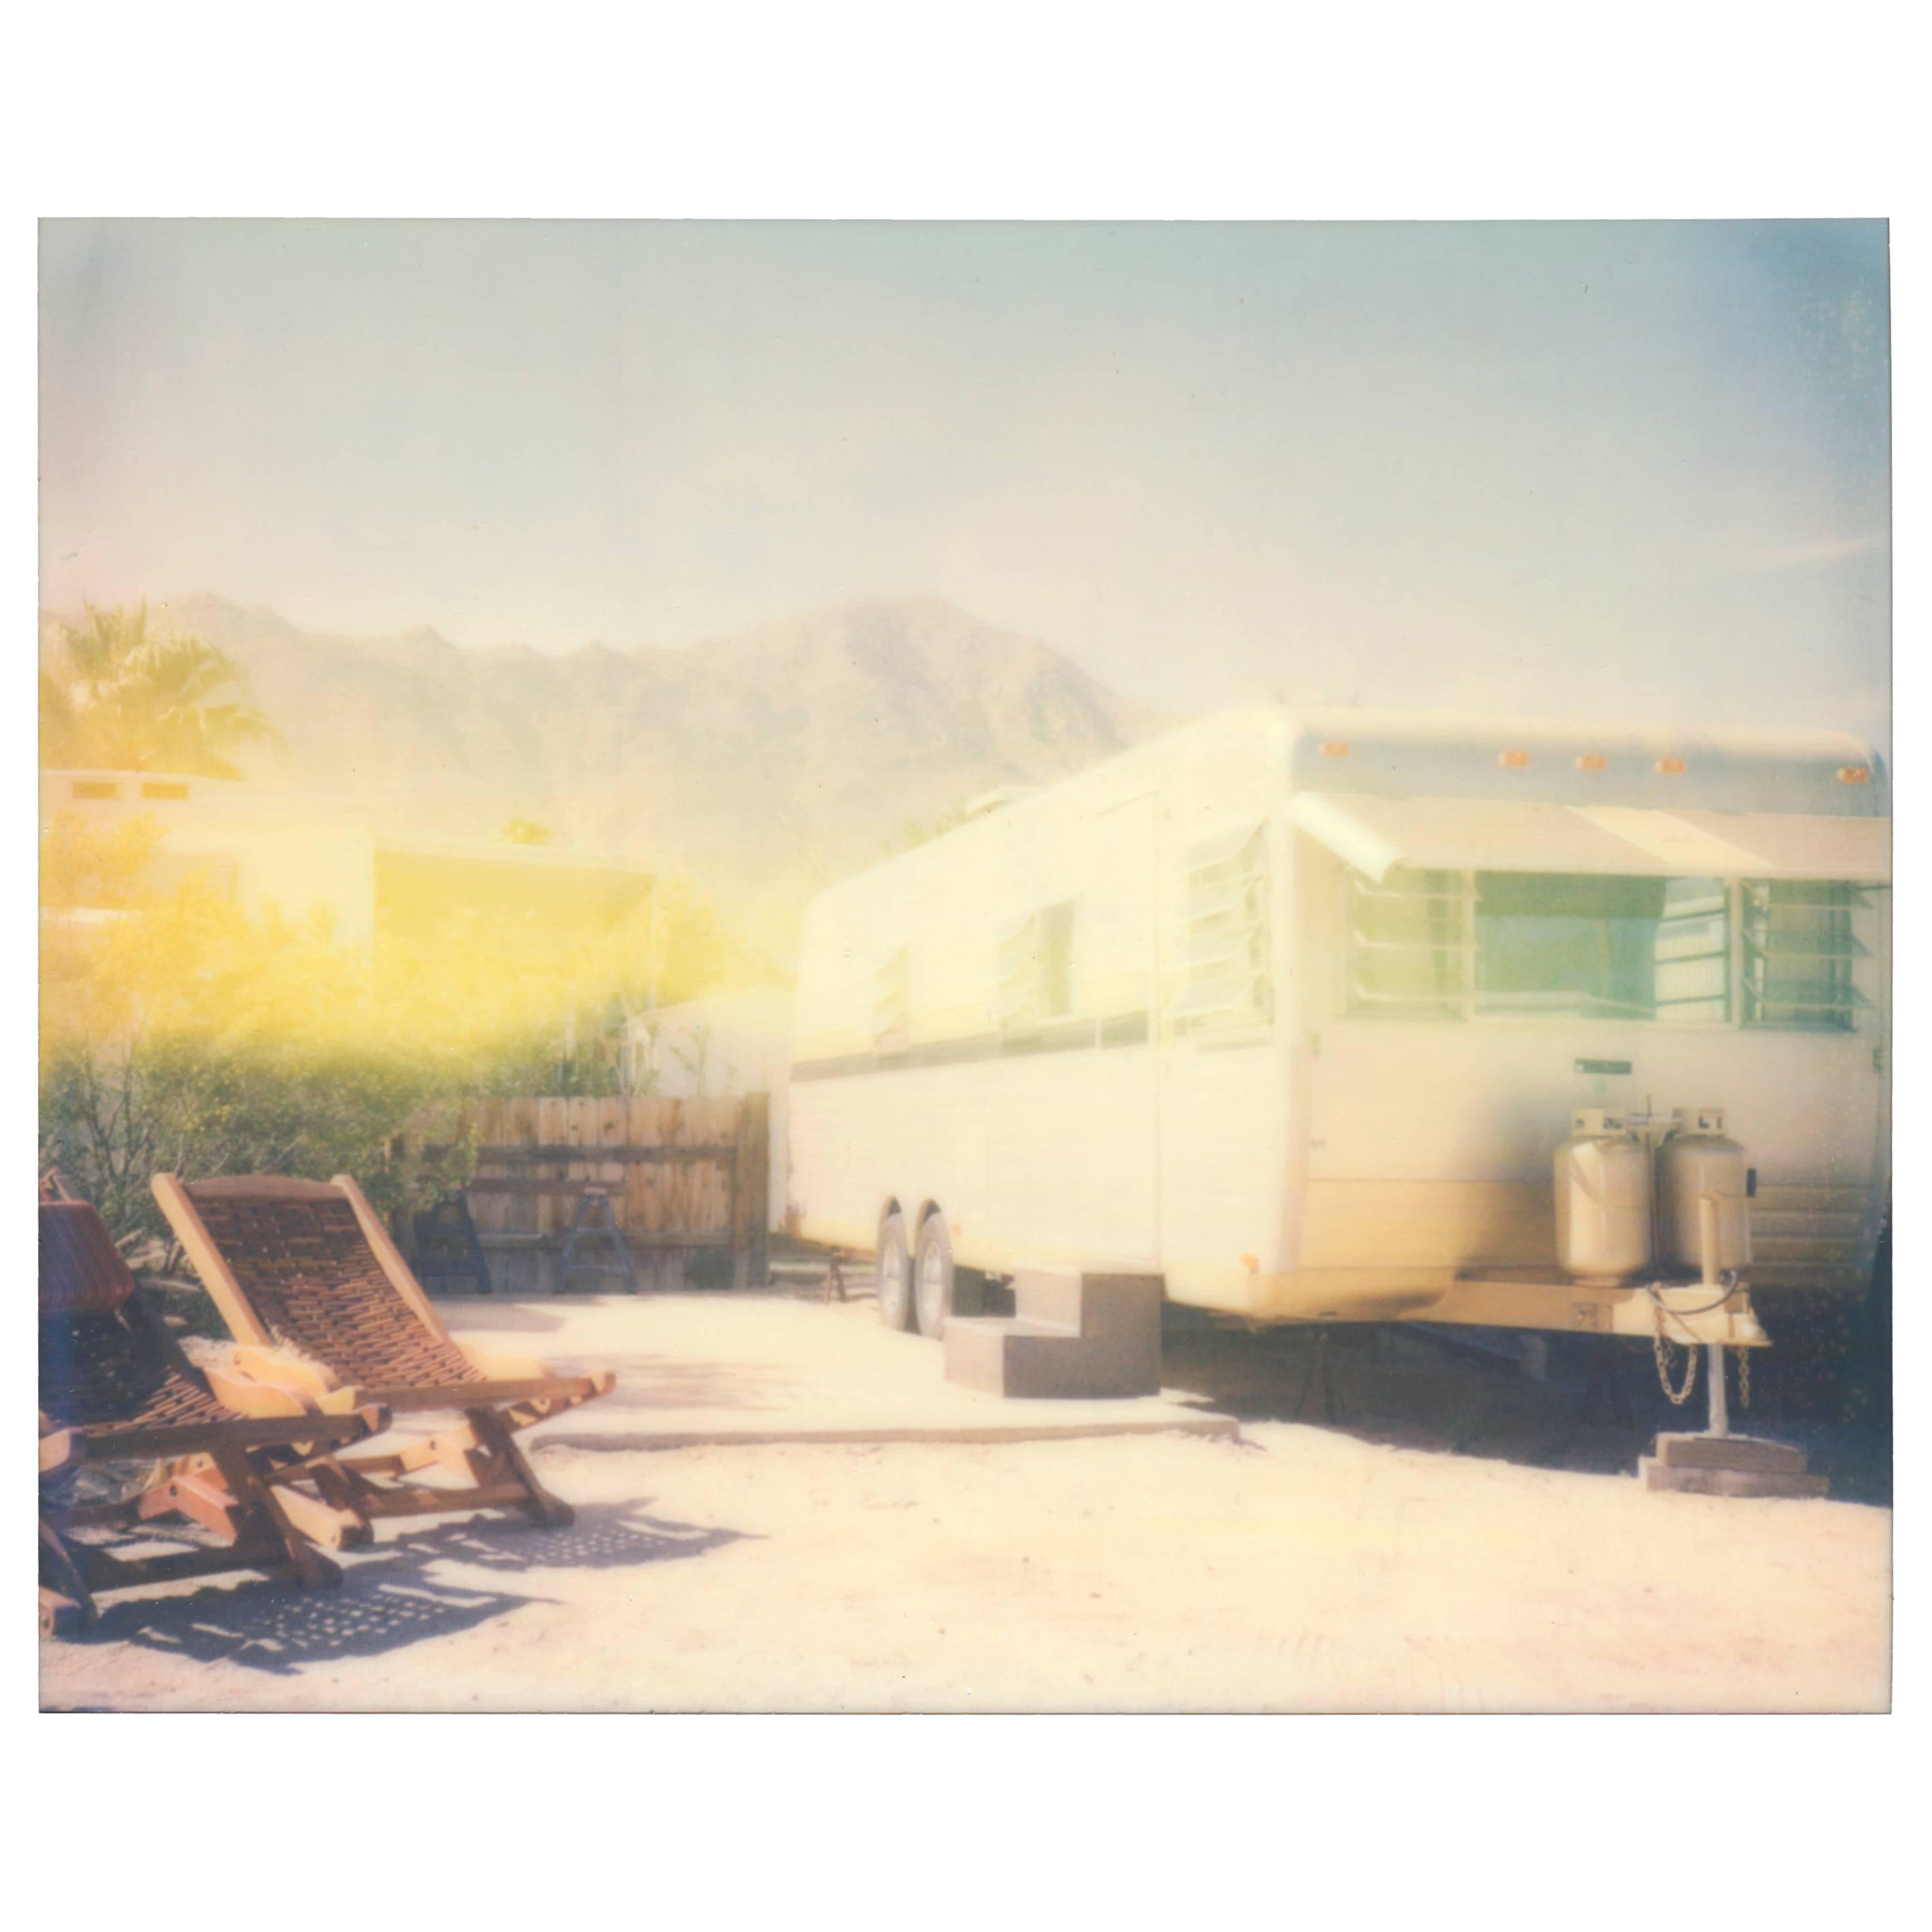 'Desert Sands' (California Badlands), 2016, 20x24cm,
Edition 6/10, digital C-Print, based on a Polaroid
Certificate and Signature label
artist Inventory No. 19326.13
not mounted

Stefanie Schneider's Artist statement:

Desolation and solitude are